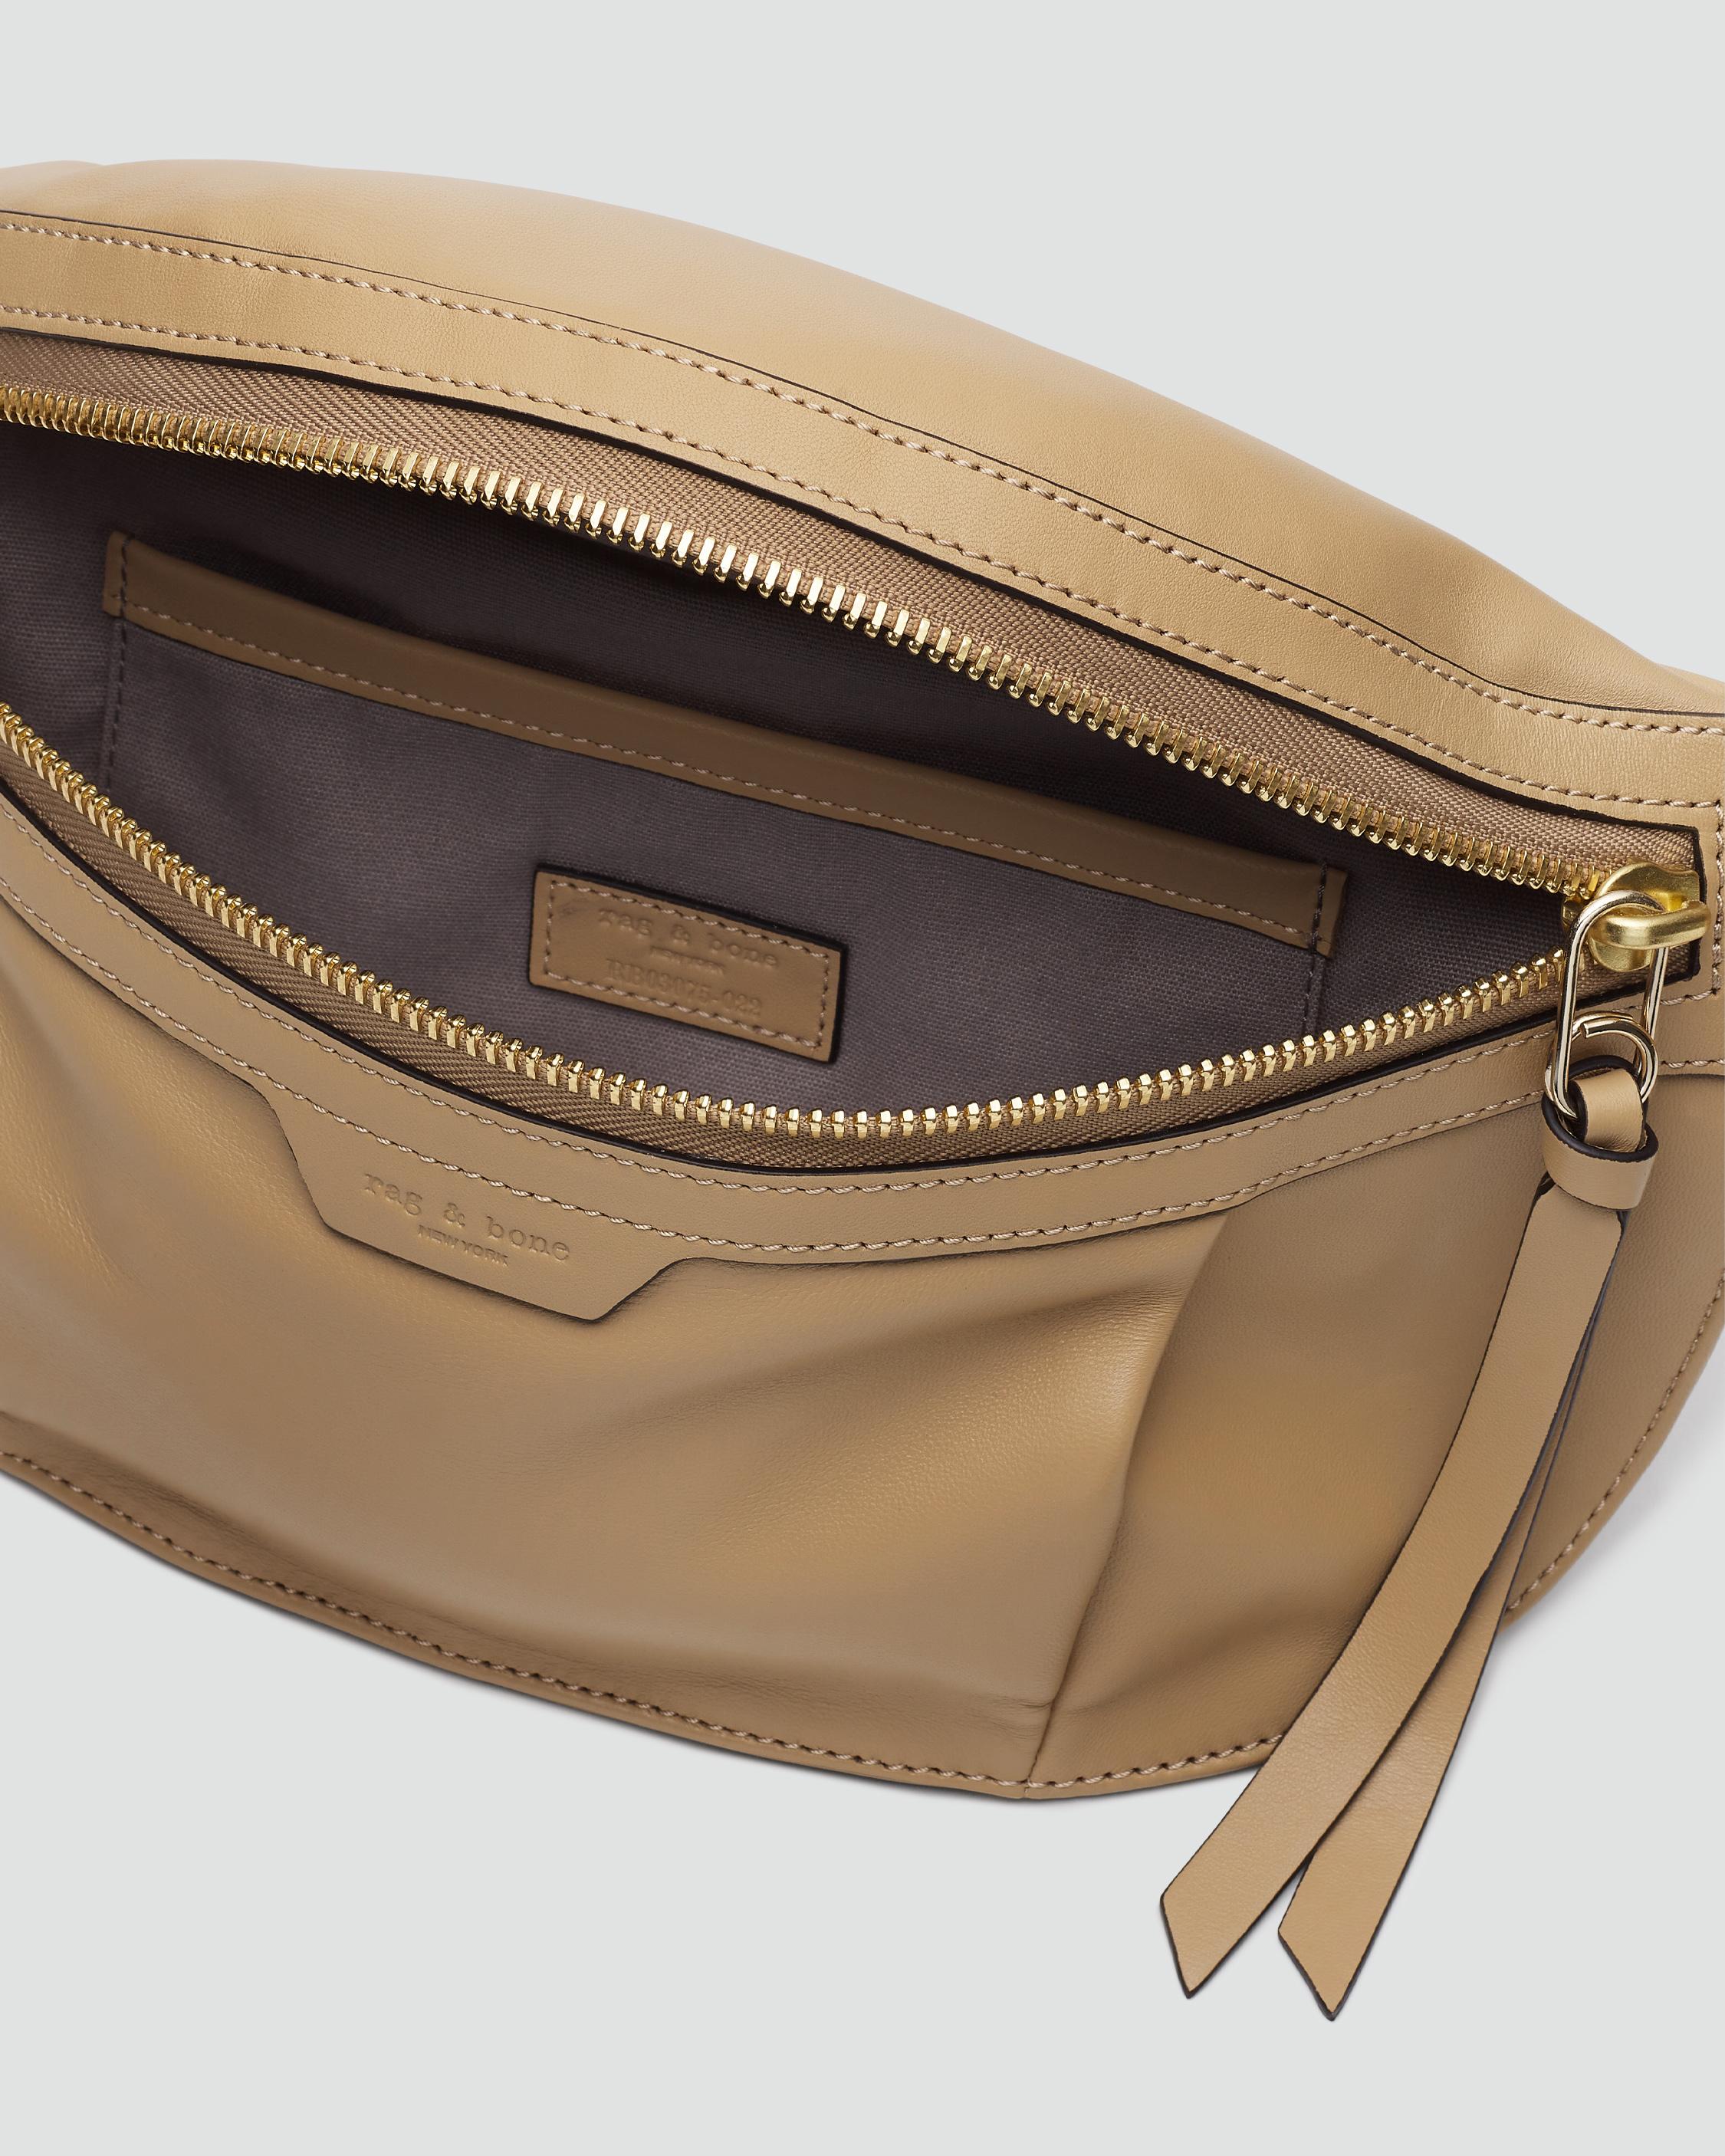 Buy the Commuter Fanny Pack - Leather